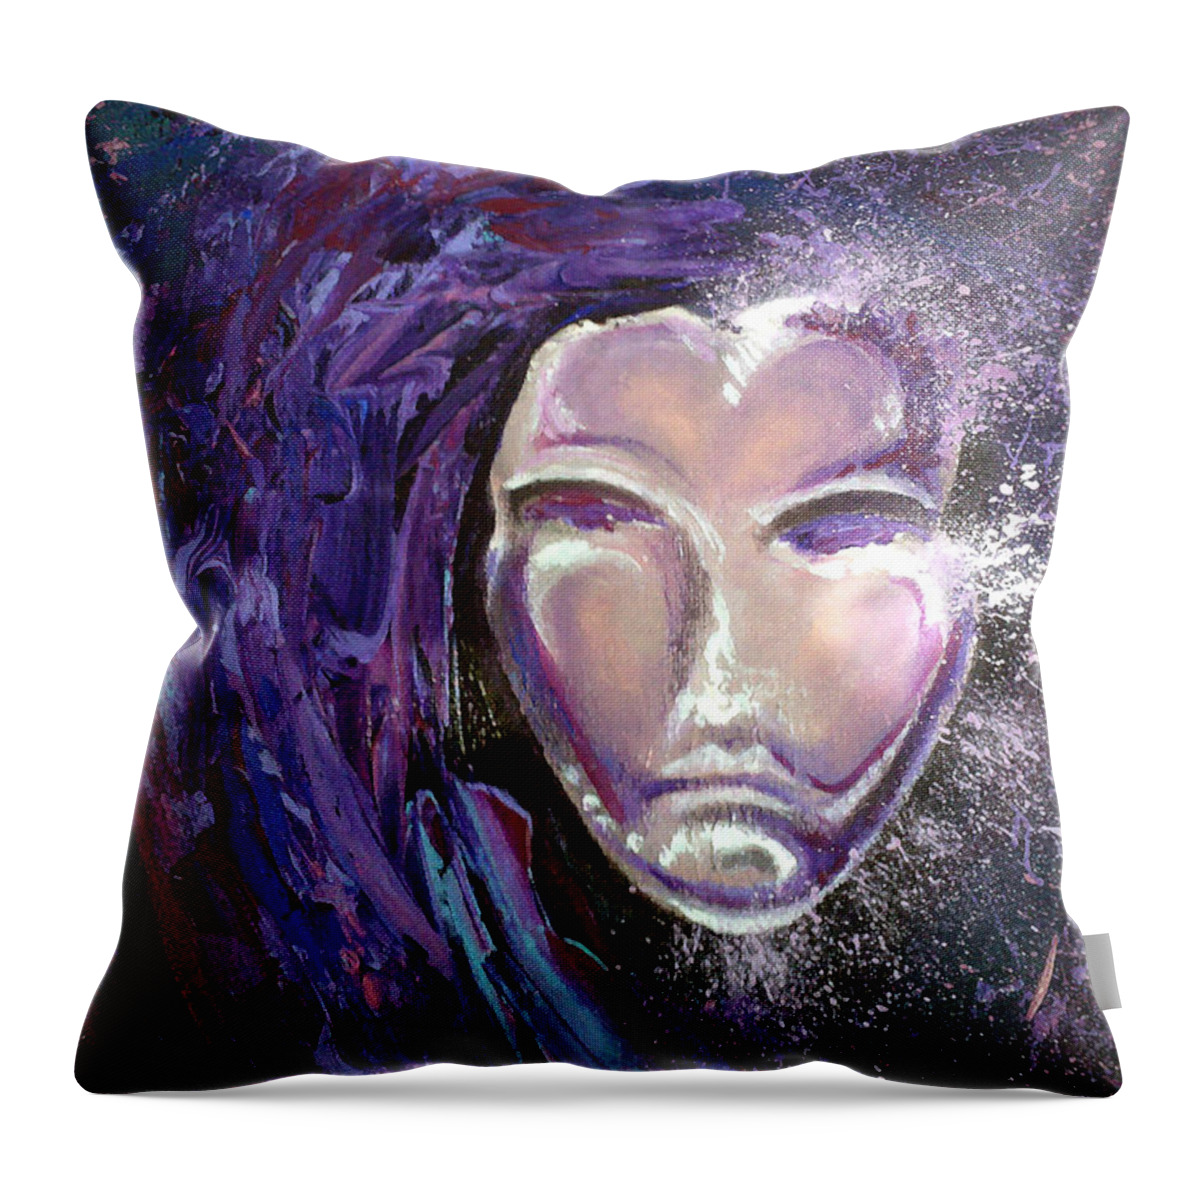 Mardi Gras Throw Pillow featuring the painting Mask by Kevin Middleton